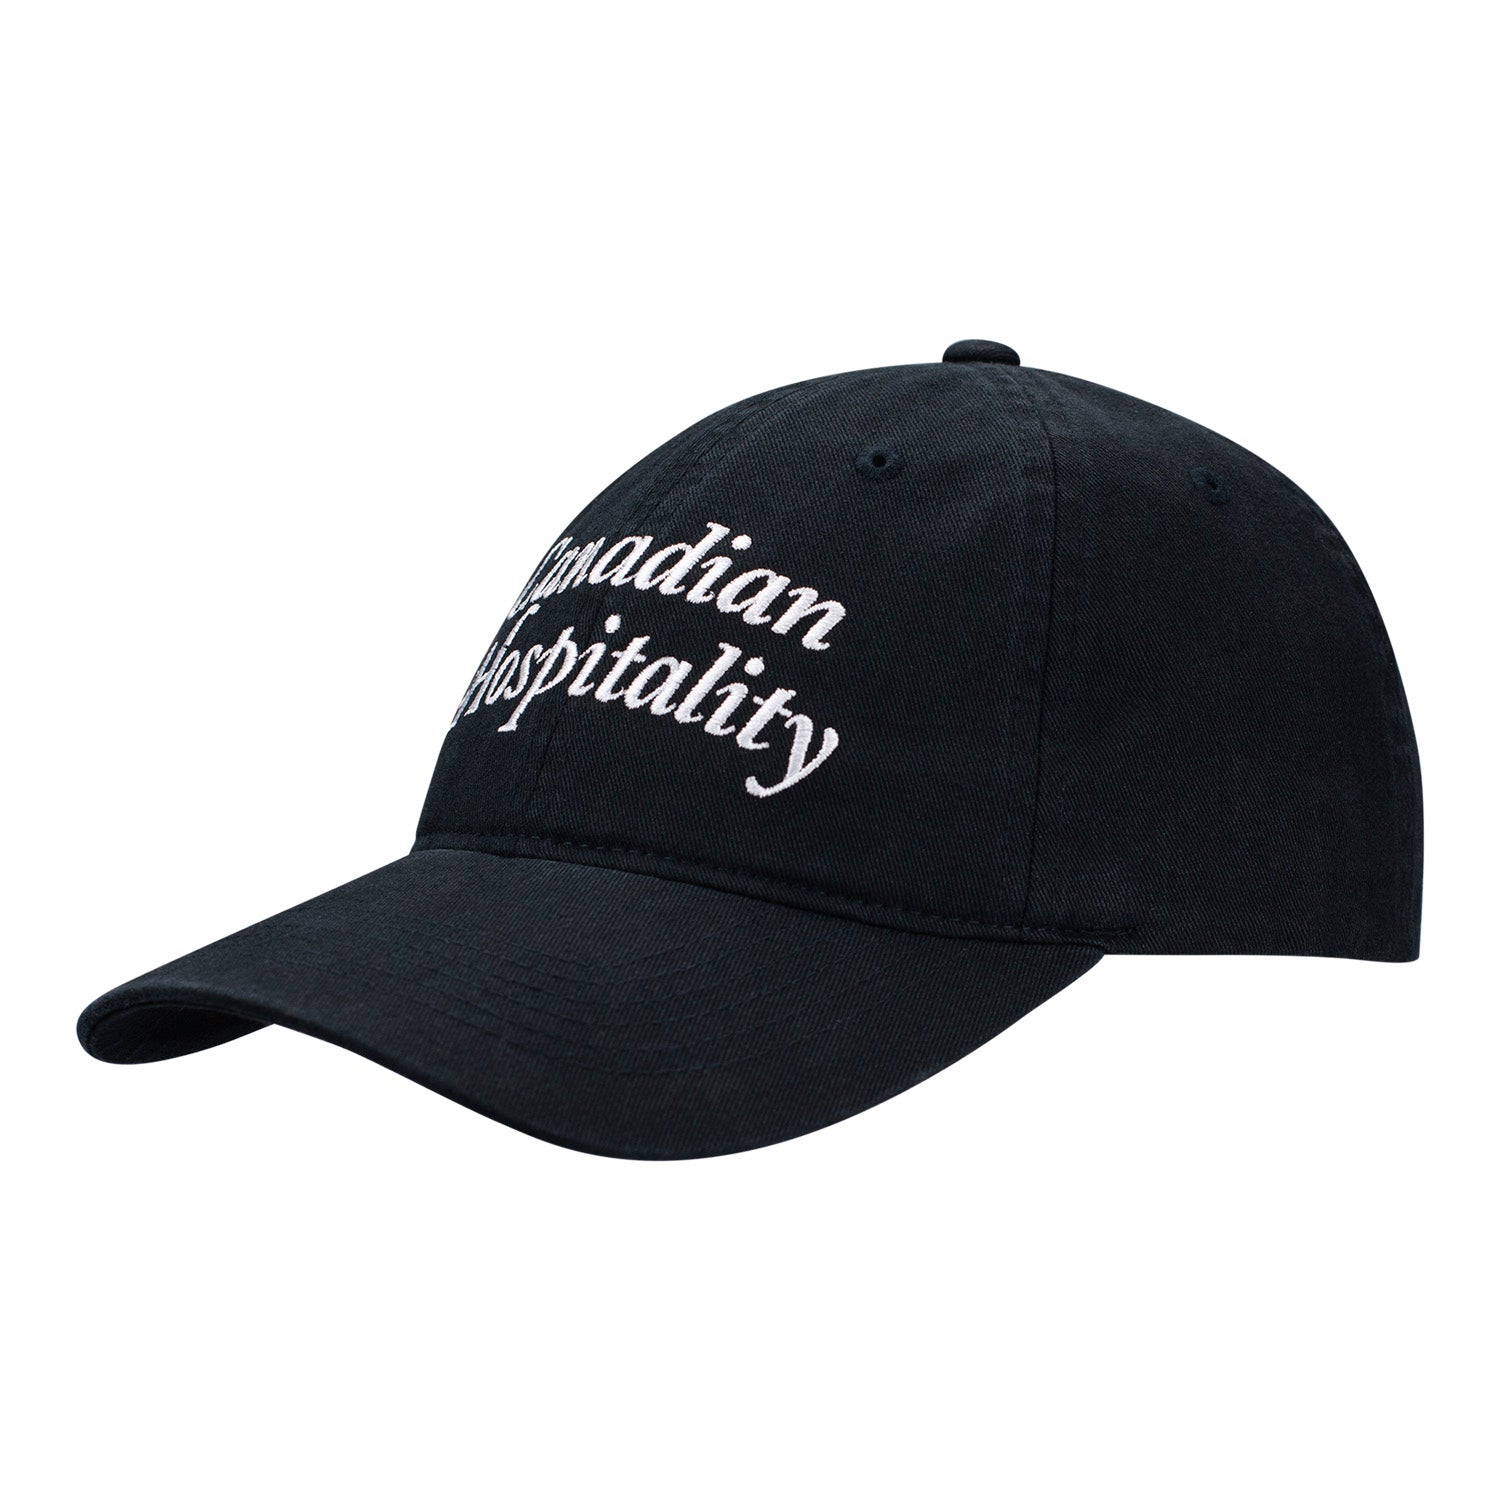 Overwatch 2 Sojourn Canadian Hospitality Black Dad Hat - Front Right Side View